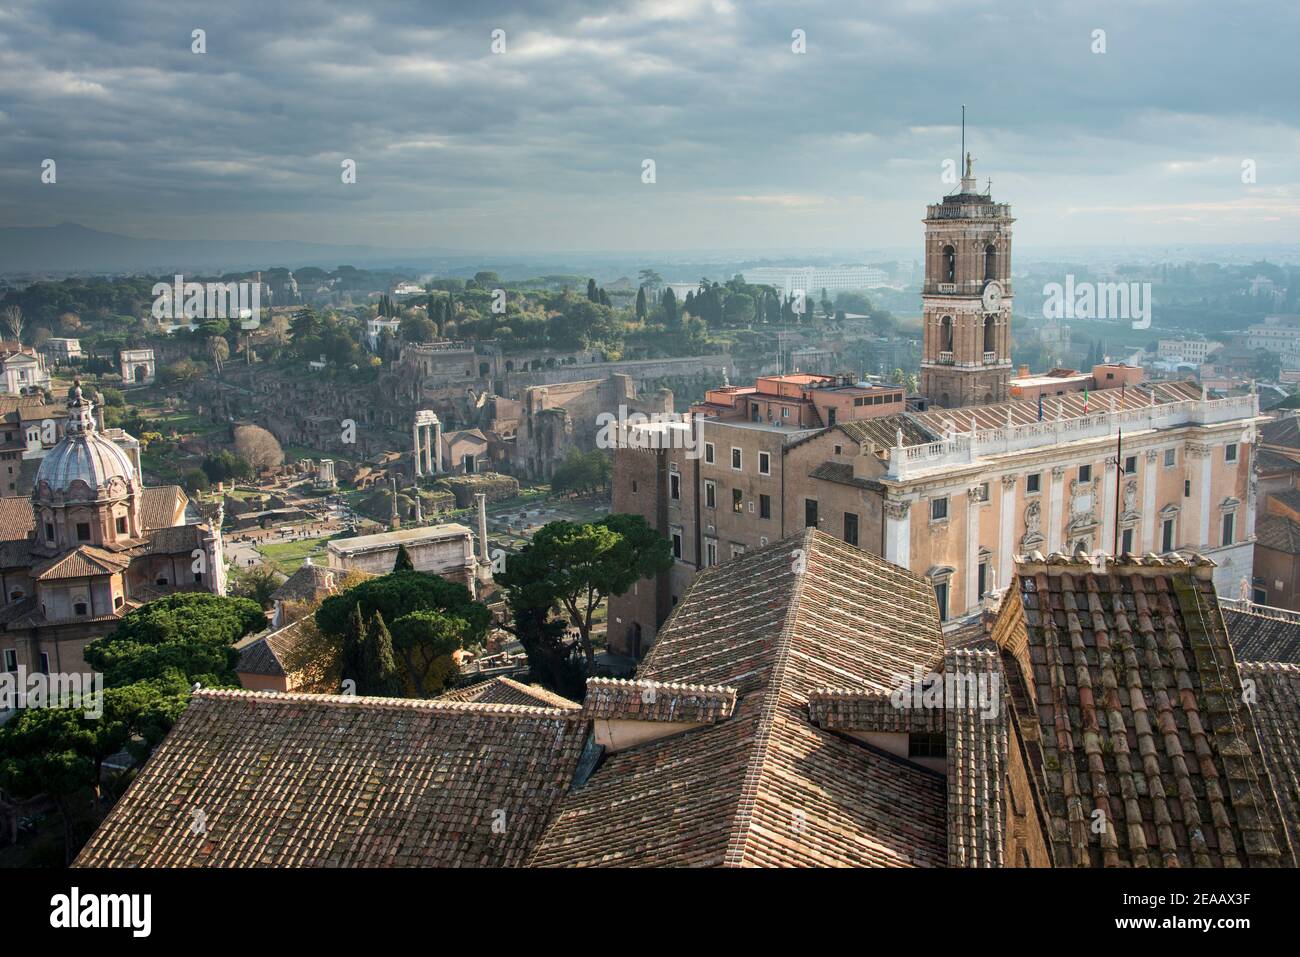 City view from the terrace of the Vittorio Emanuele Palace, Rome Stock Photo